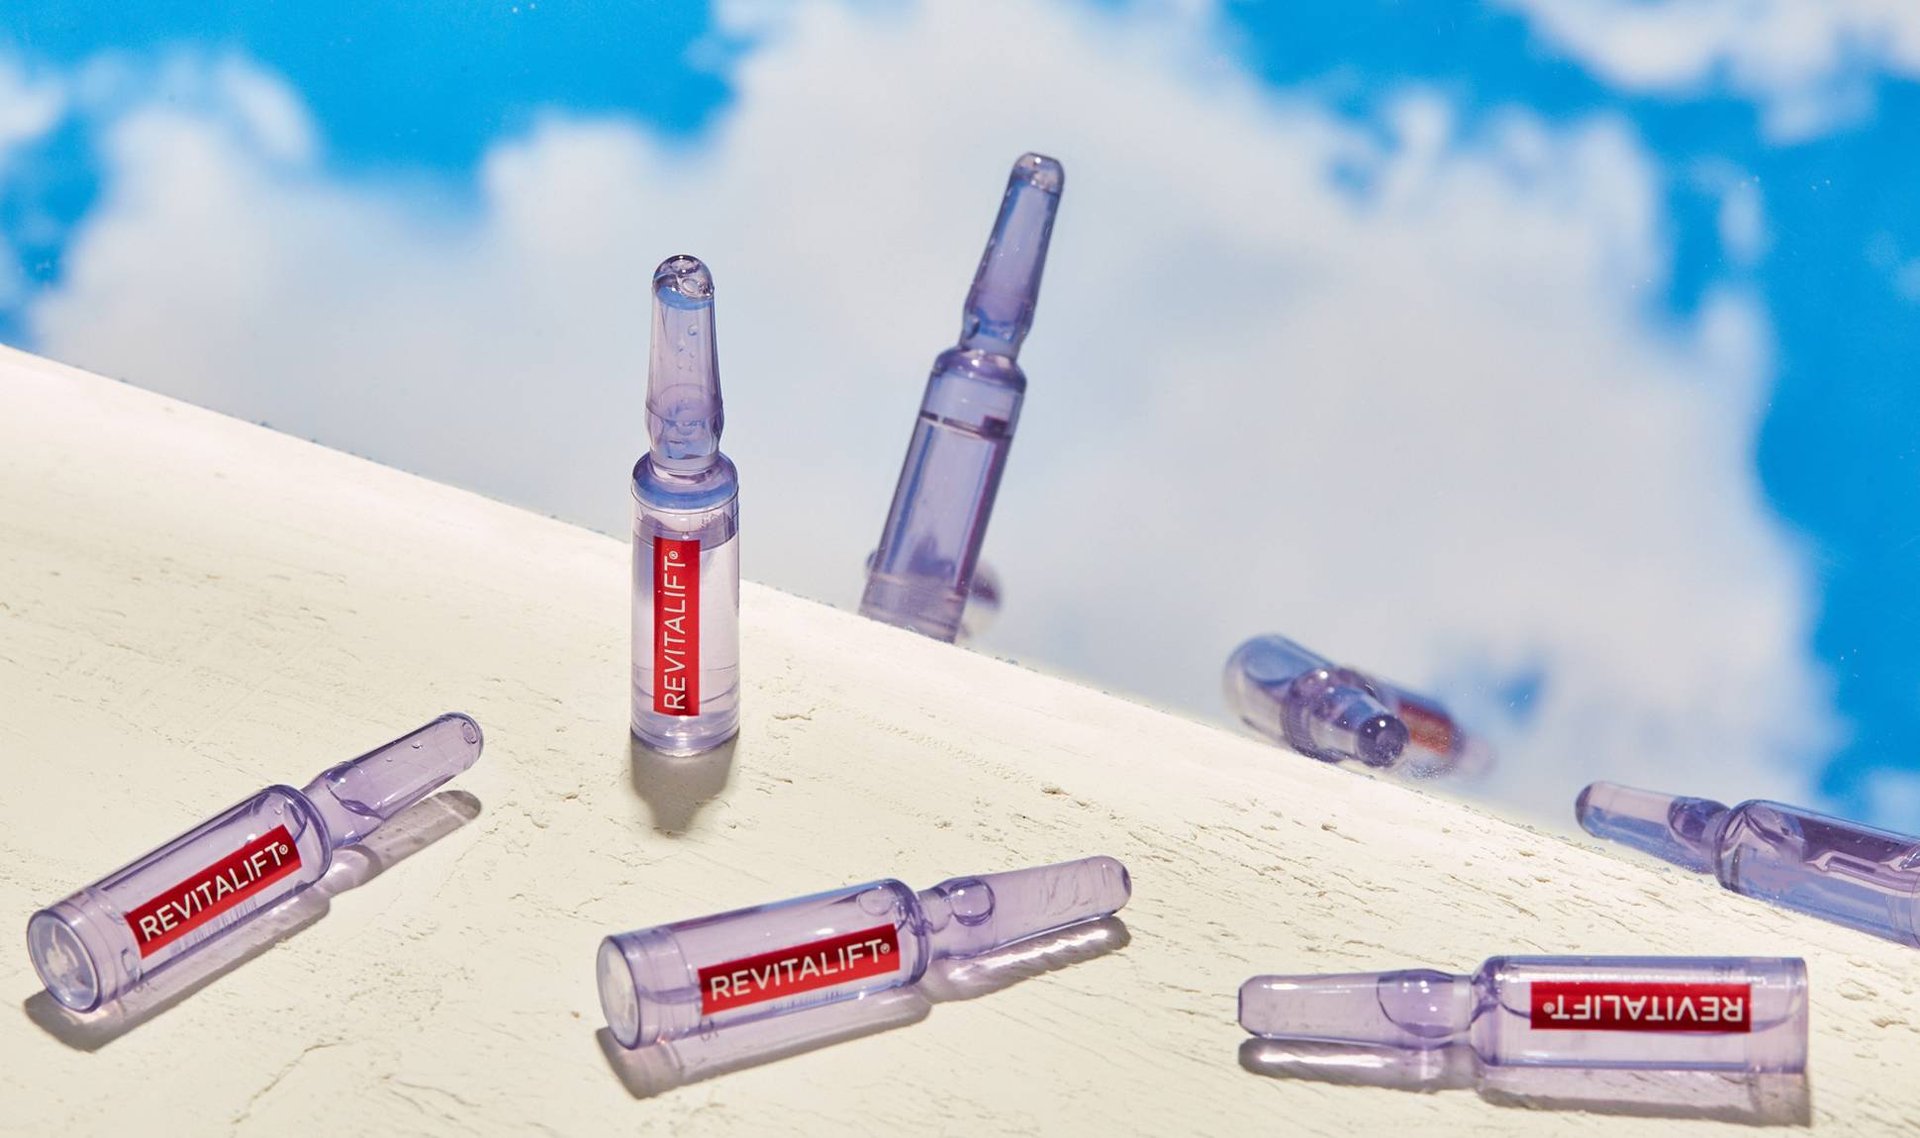 Hyaluronic Acid Ampoules vs. Hyaluronic Acid Serum: What’s the Difference?